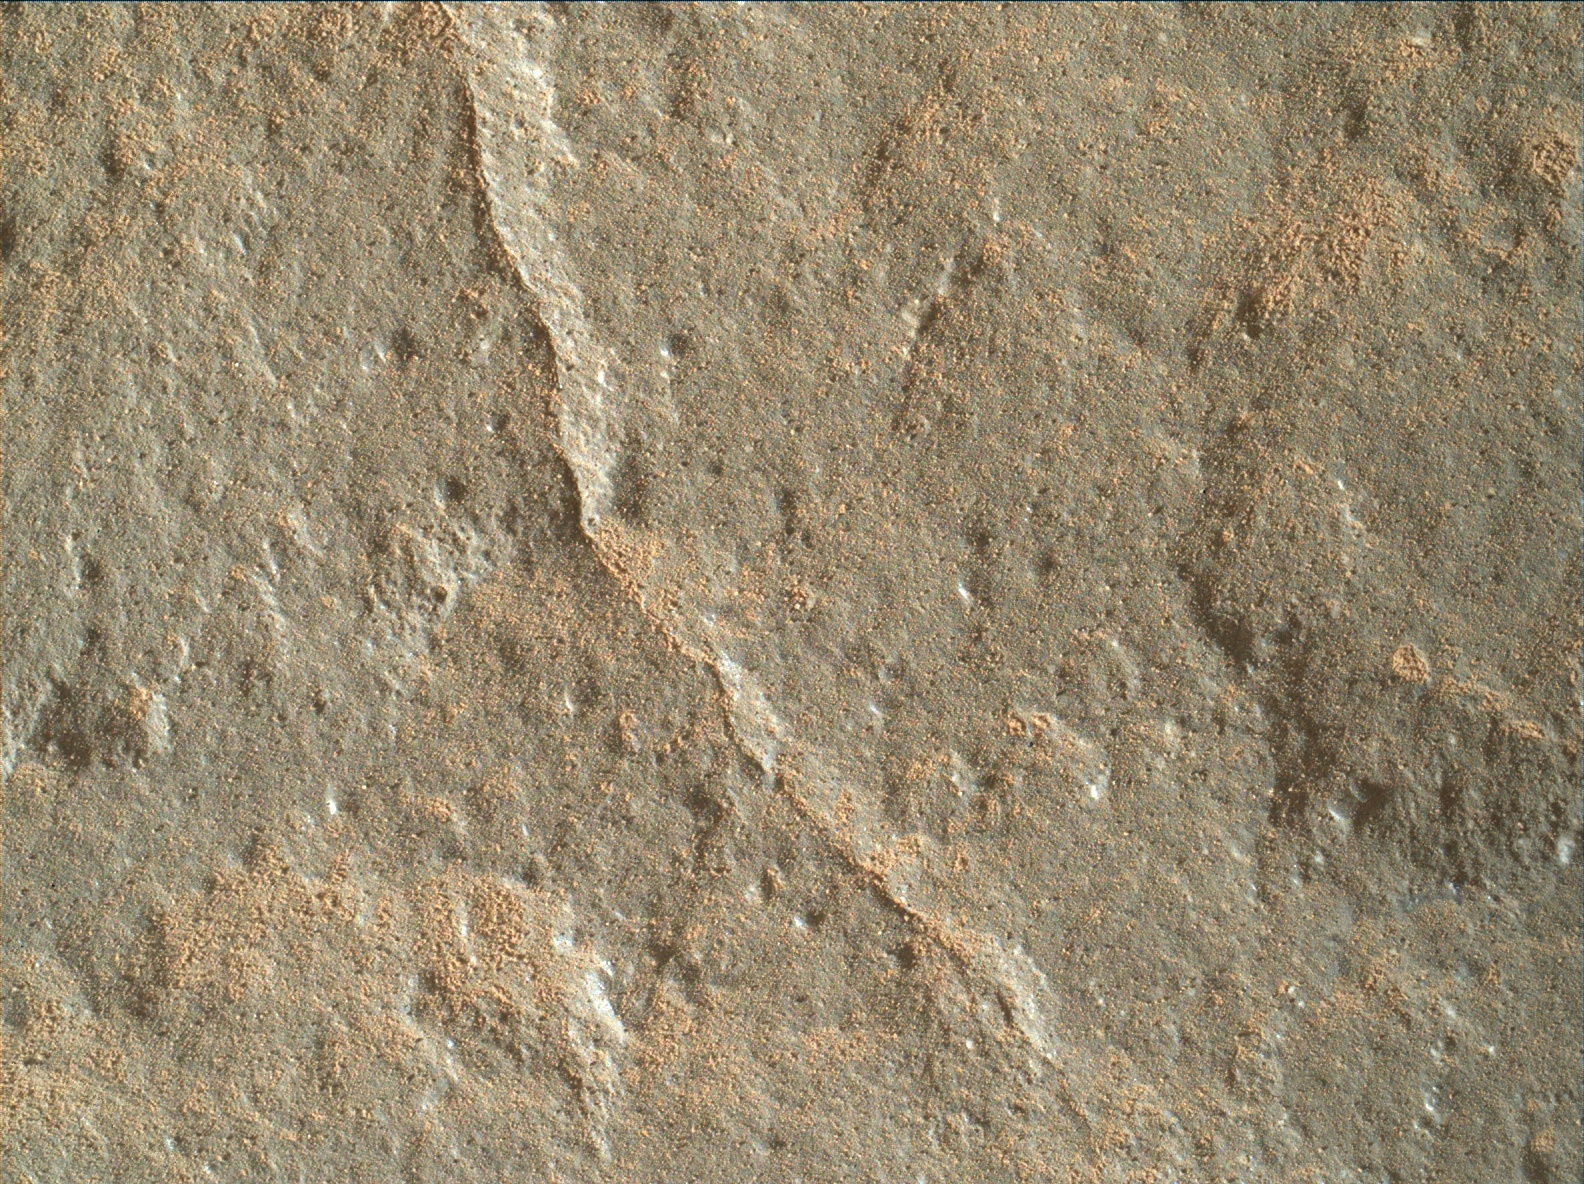 Nasa's Mars rover Curiosity acquired this image using its Mars Hand Lens Imager (MAHLI) on Sol 1150